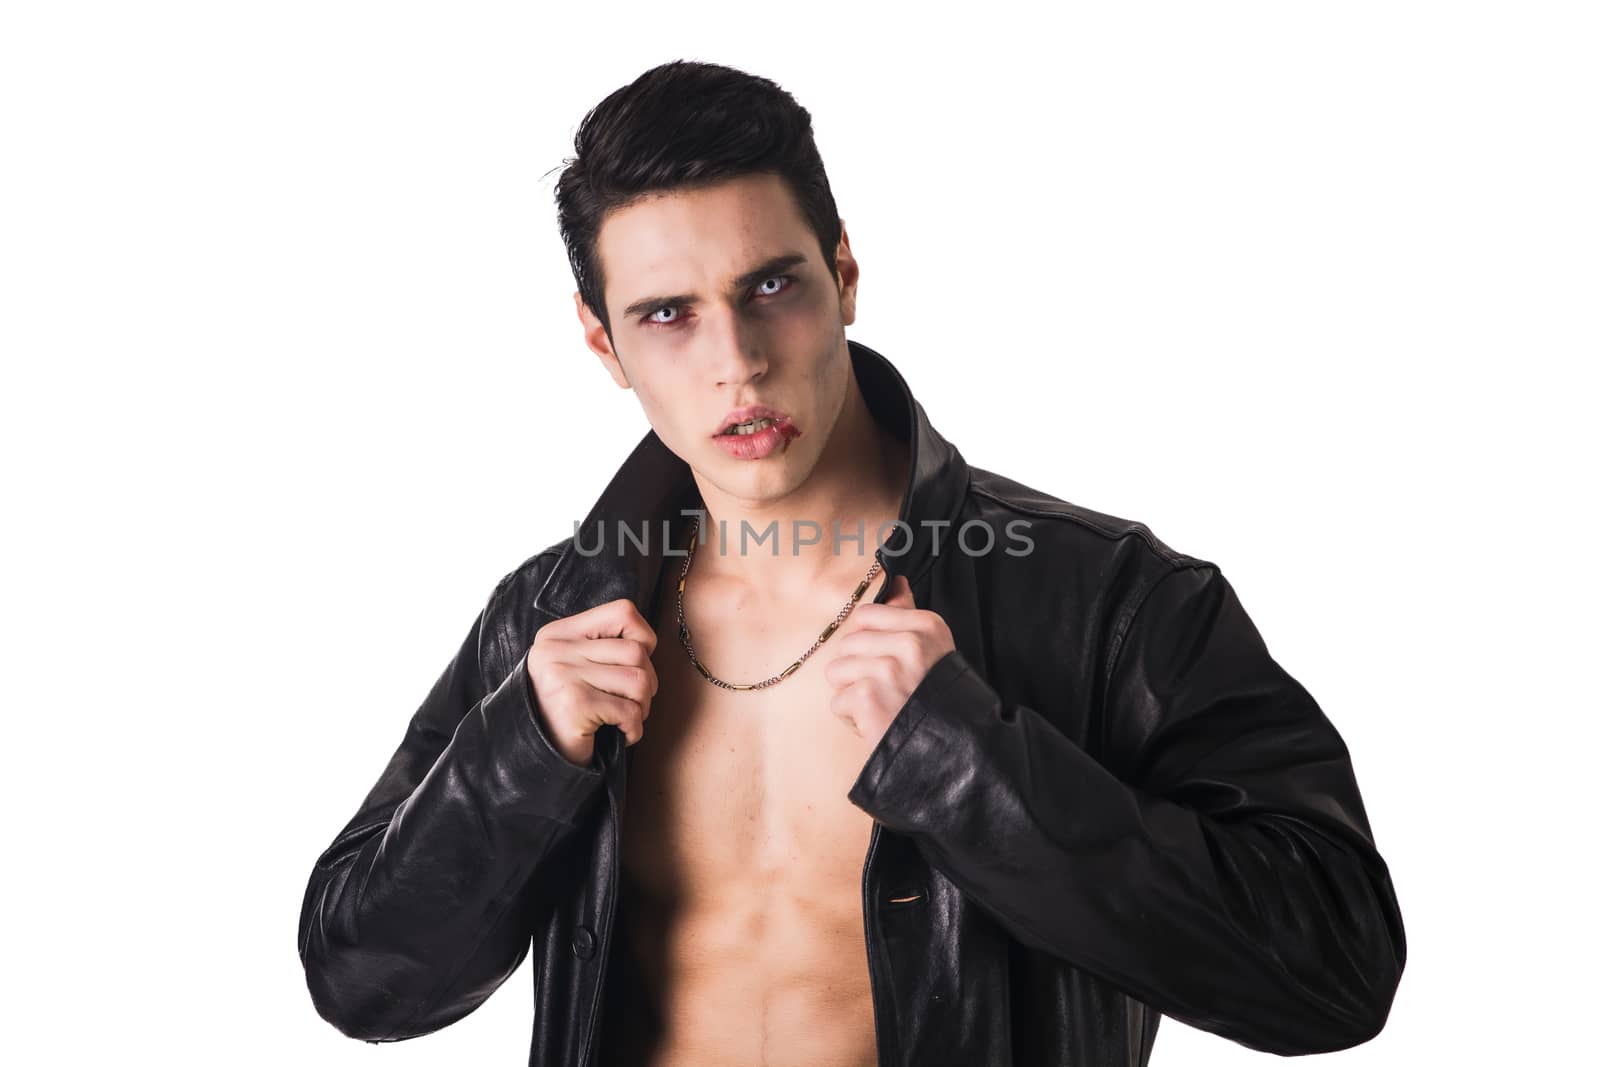 Portrait of a Young Vampire Man in an Open Black Leather Jacket, Showing his Chest and Abs, Looking at the Camera, Isolated on a White Background.